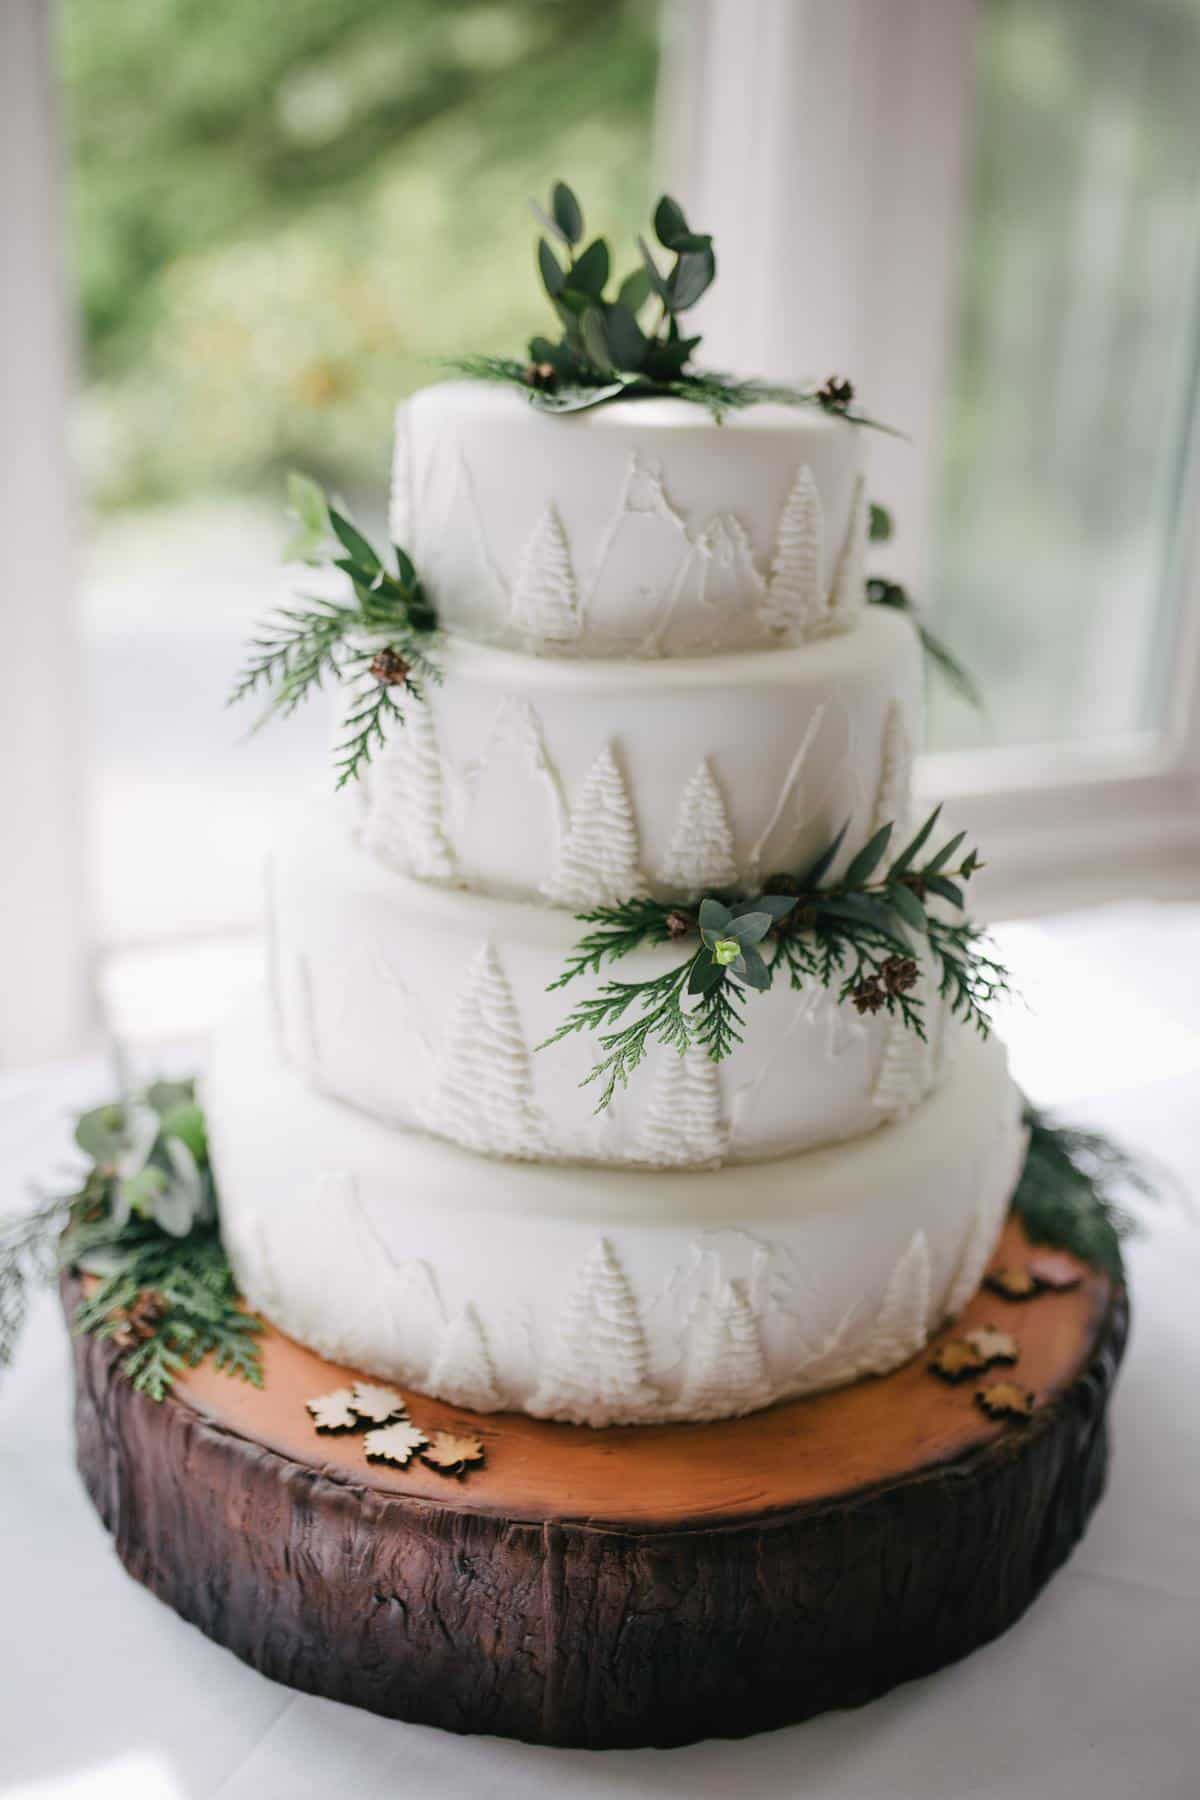 focus photo of white icing-covered 4-tier cake